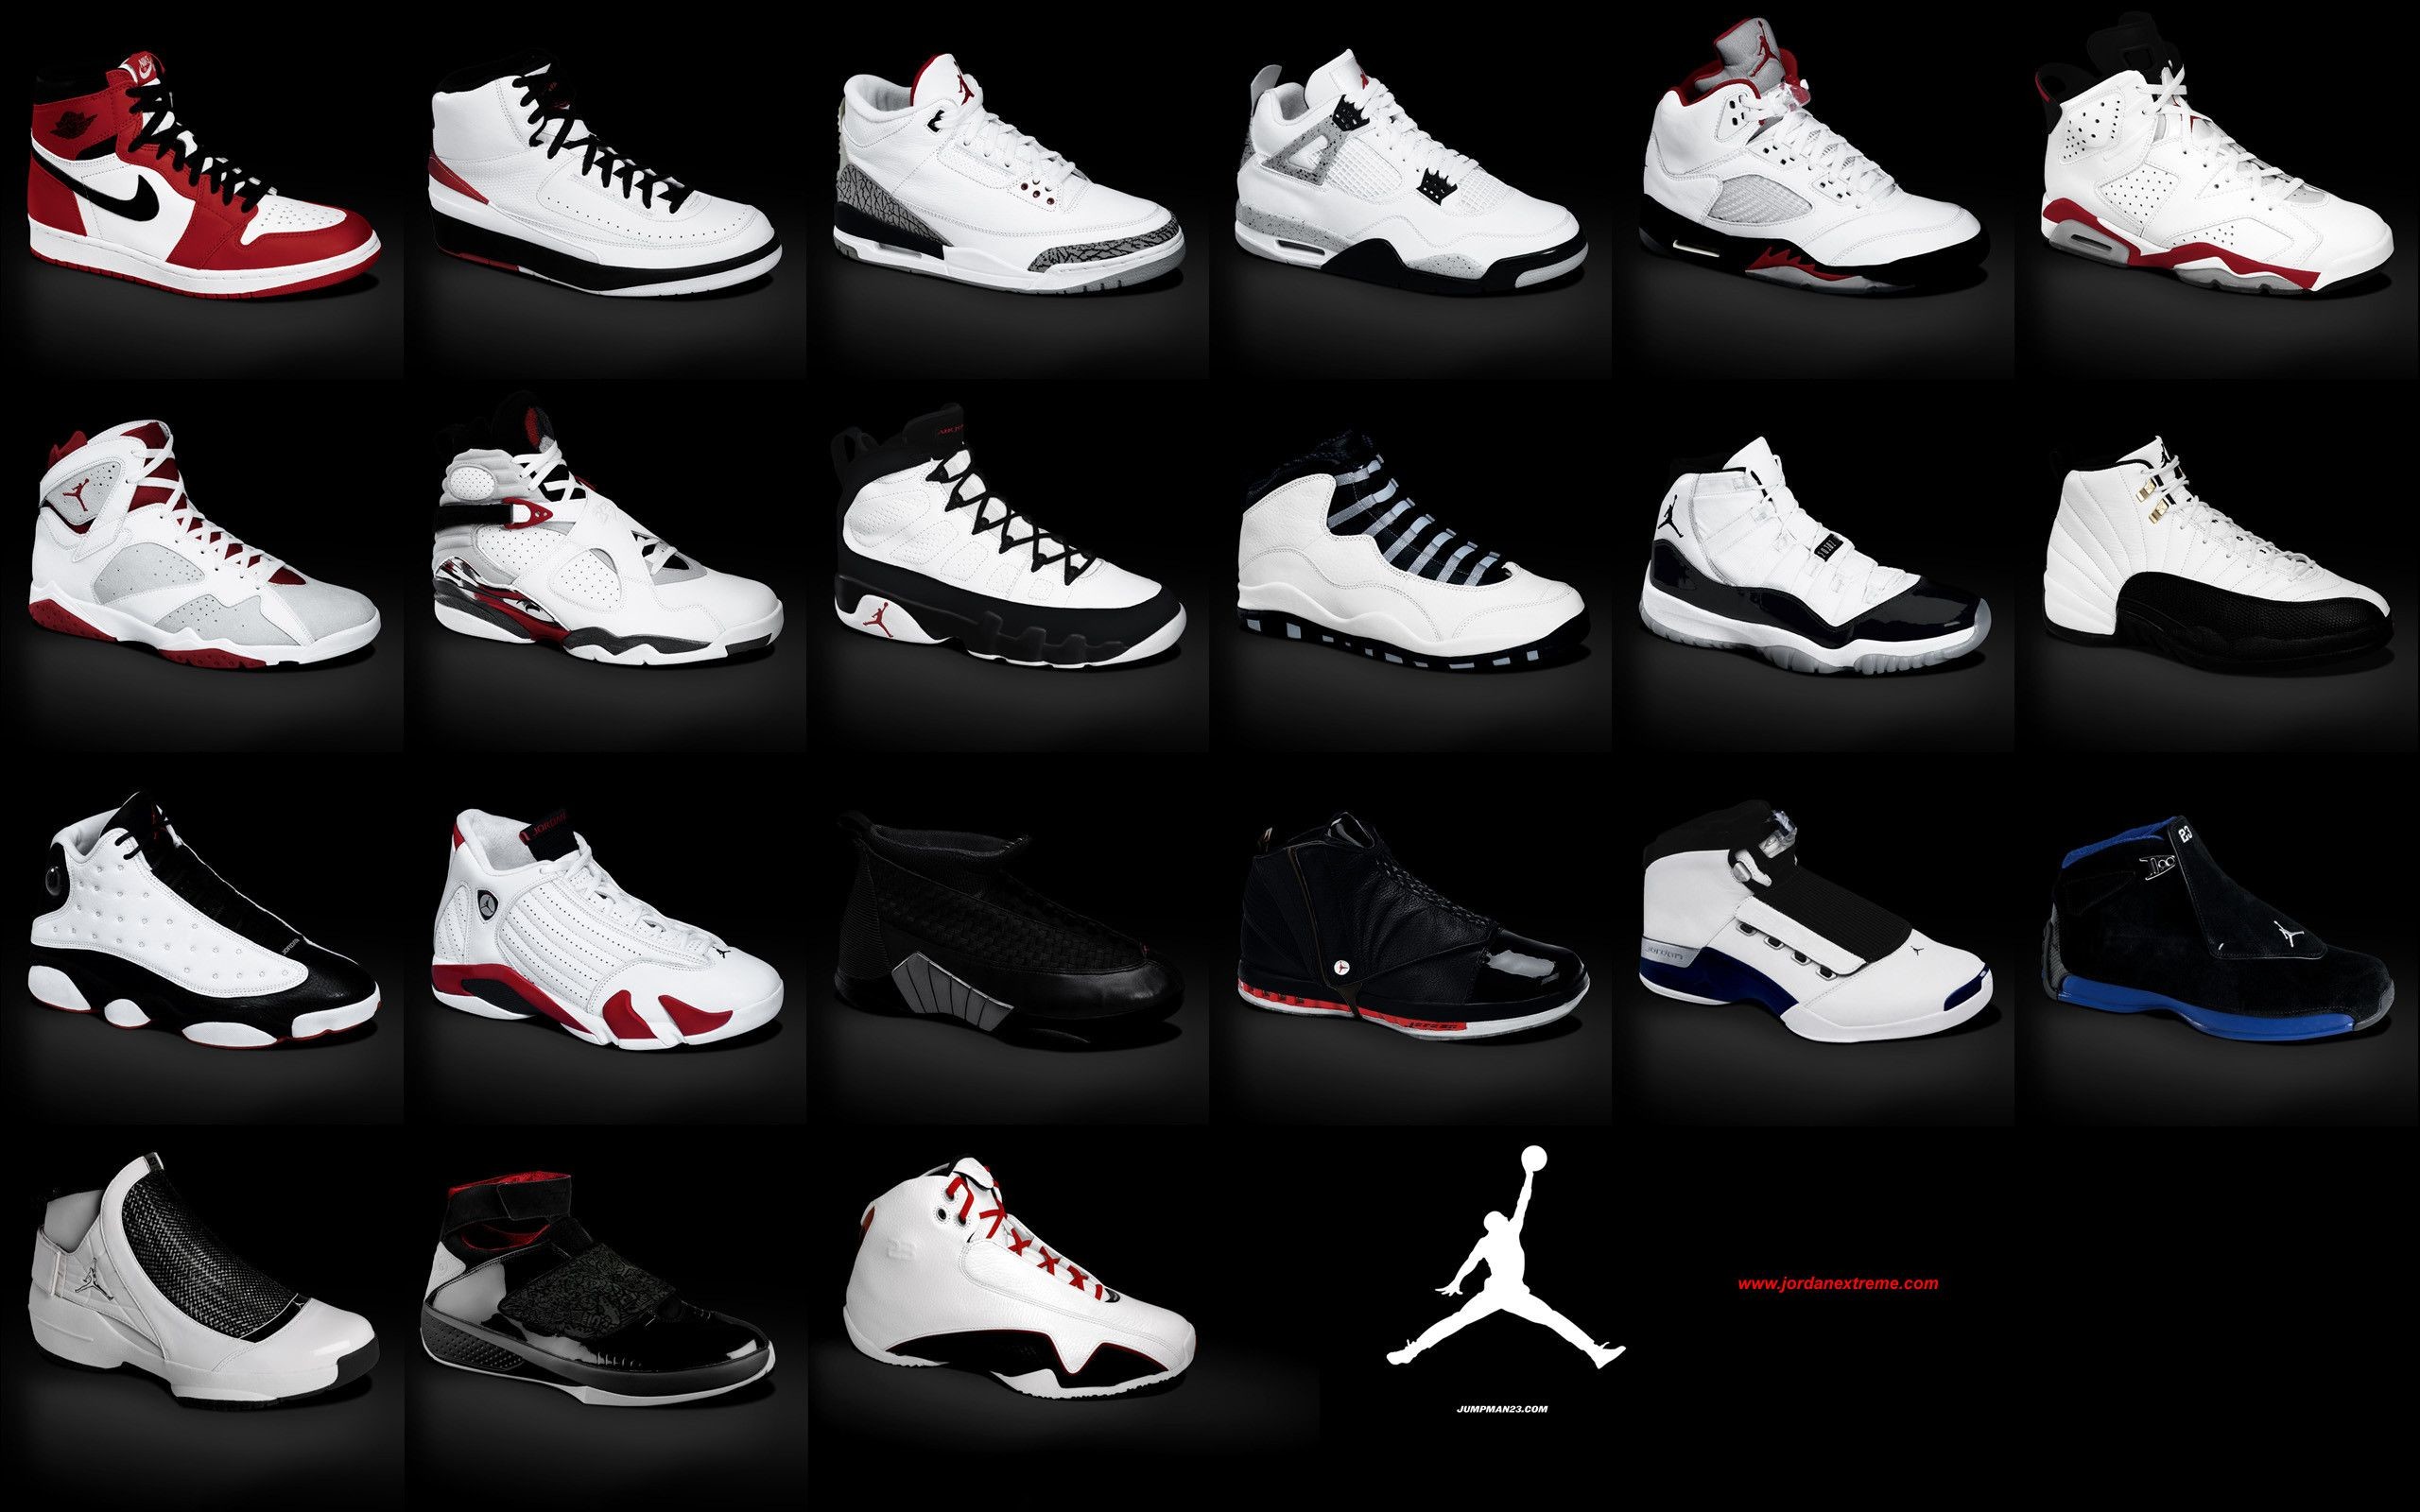 2560x1600 Jordan Shoes Wallpaper - HD Wallpapers Backgrounds of Your Choice